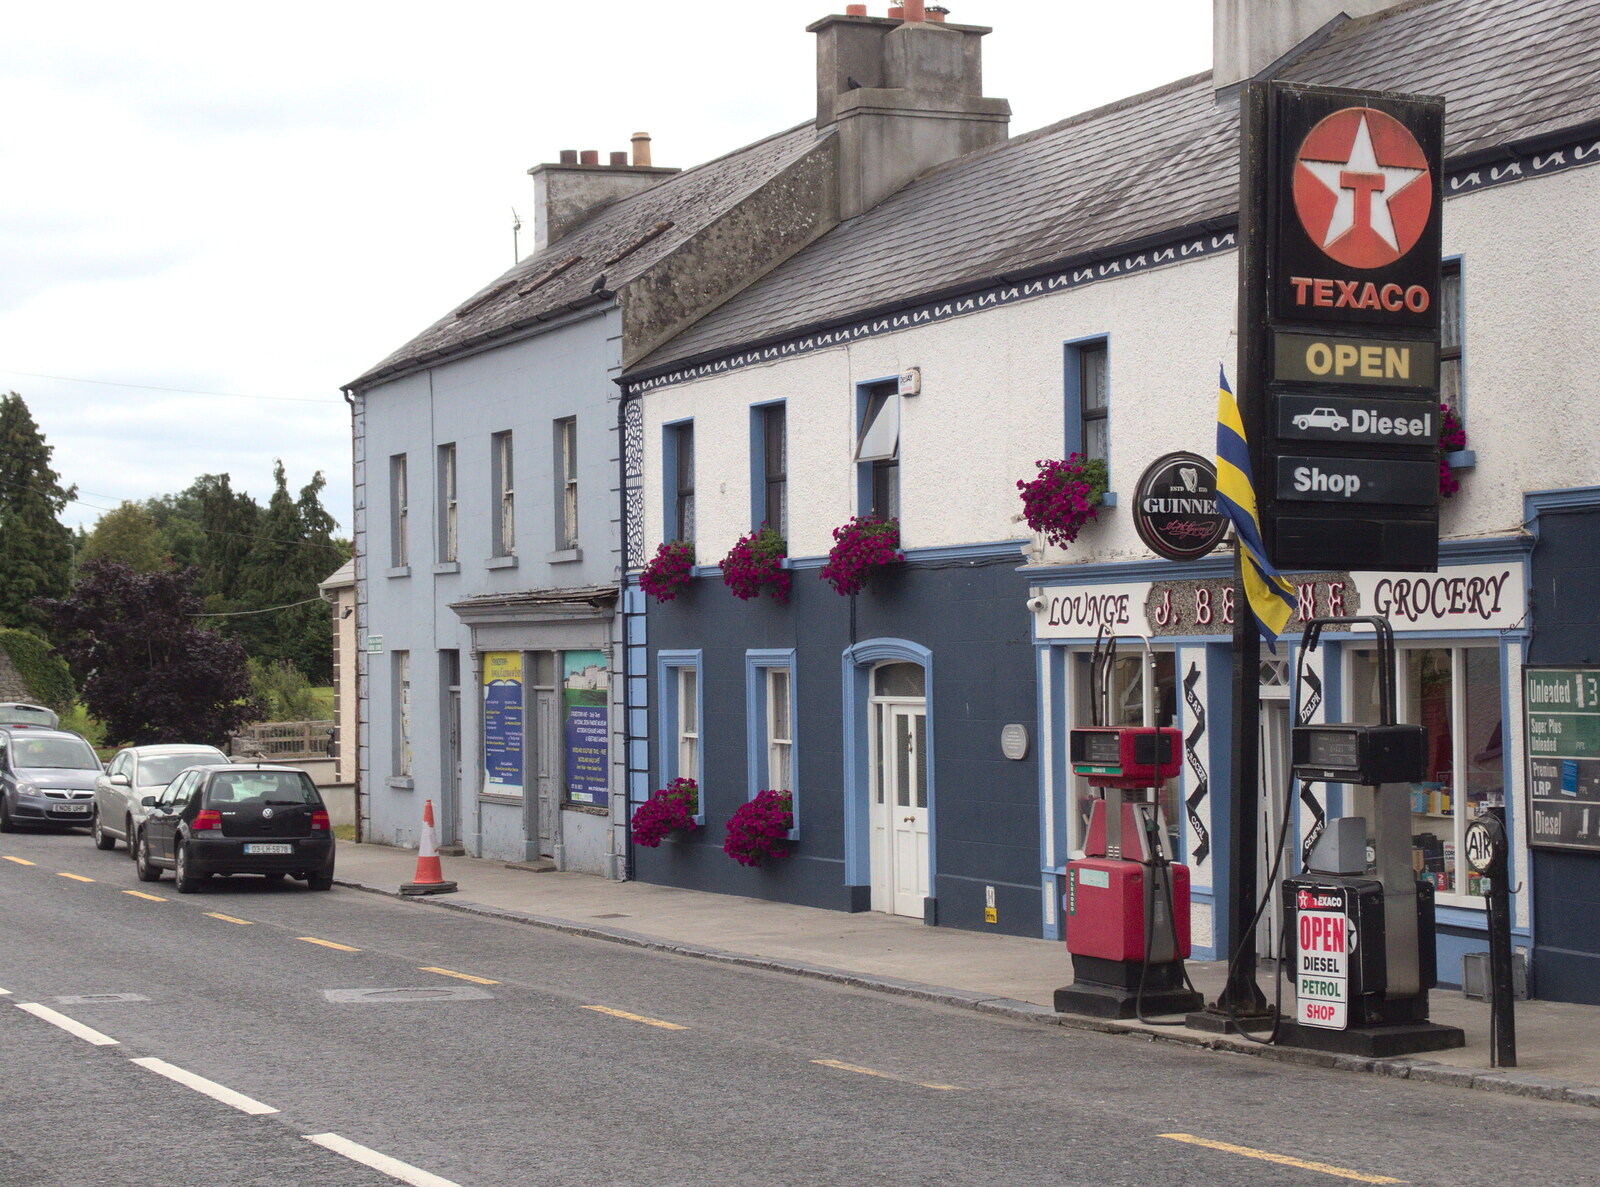 Petrol station on the High Street from From Achill to Strokestown, Mayo and Roscommon, Ireland - 10th August 2017